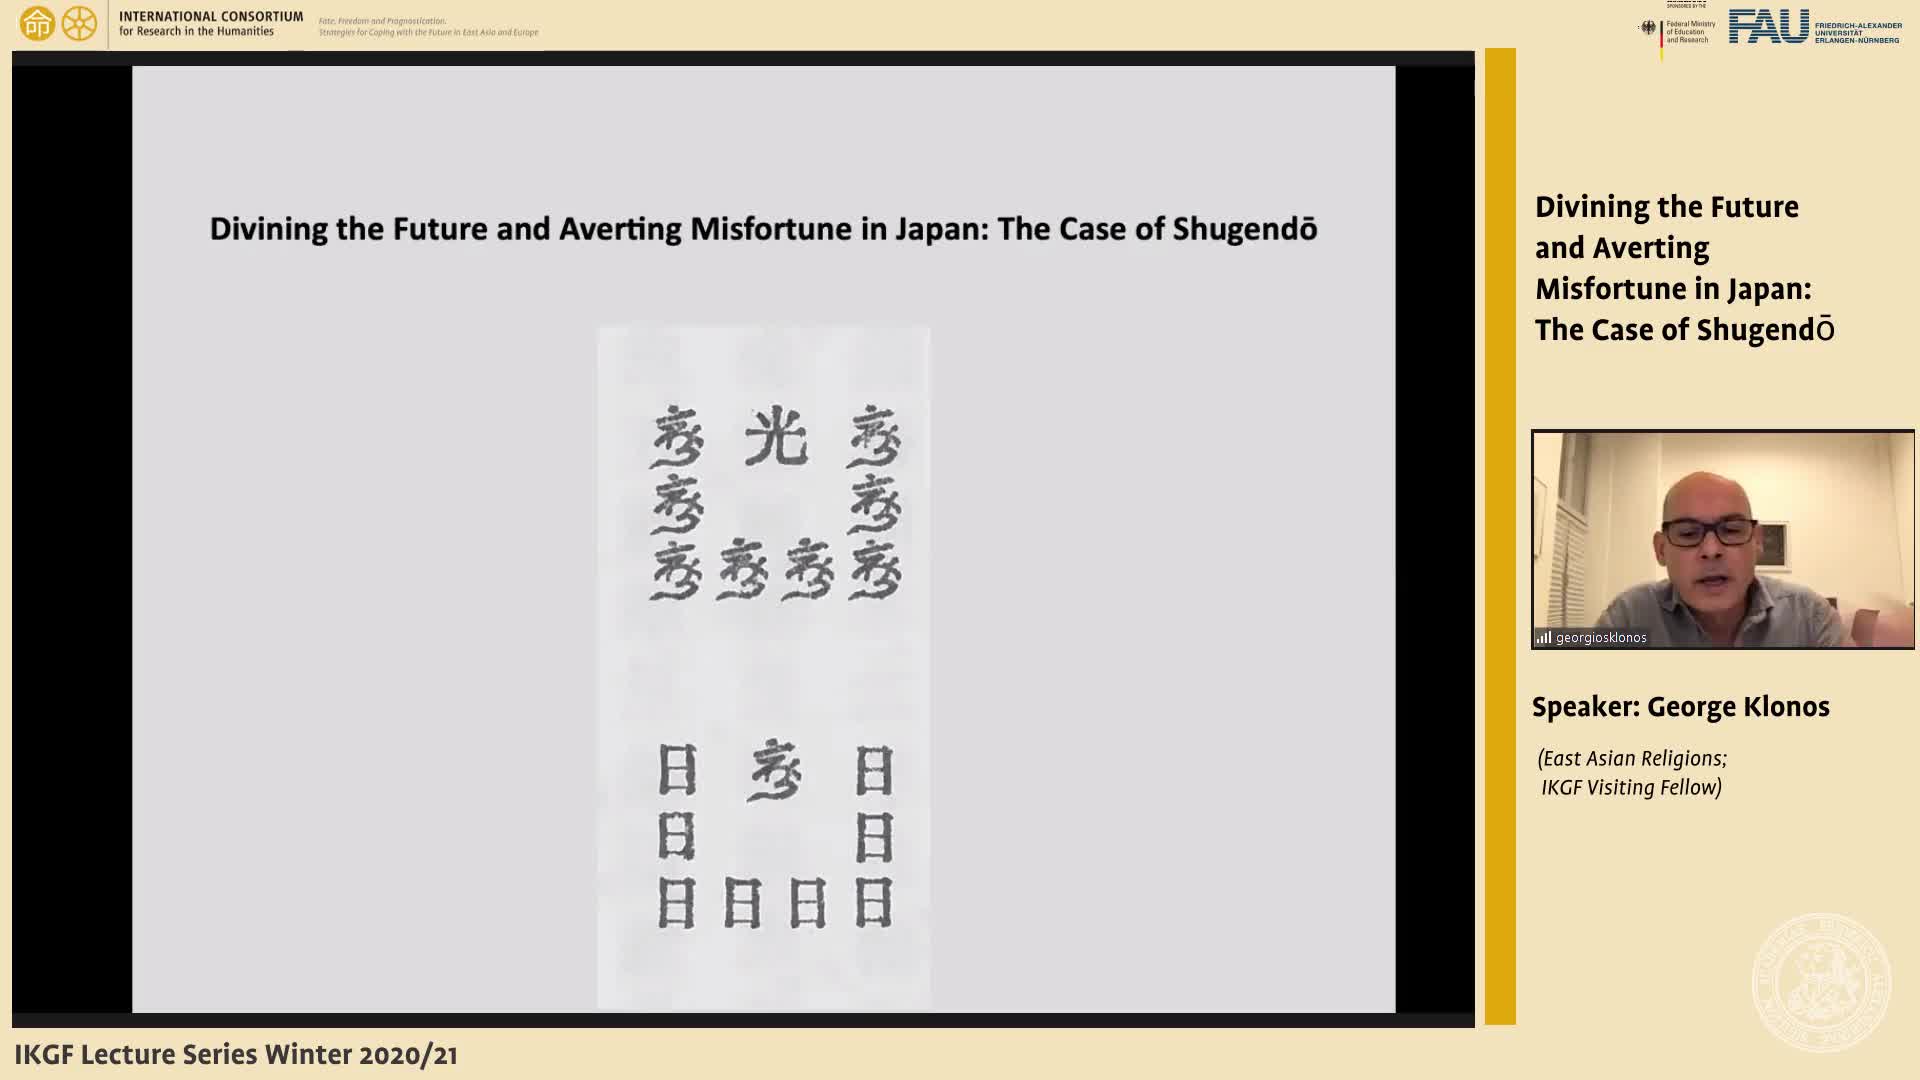 Divining the Future and Averting Misfortune in Japan: The Case of Shugendō preview image